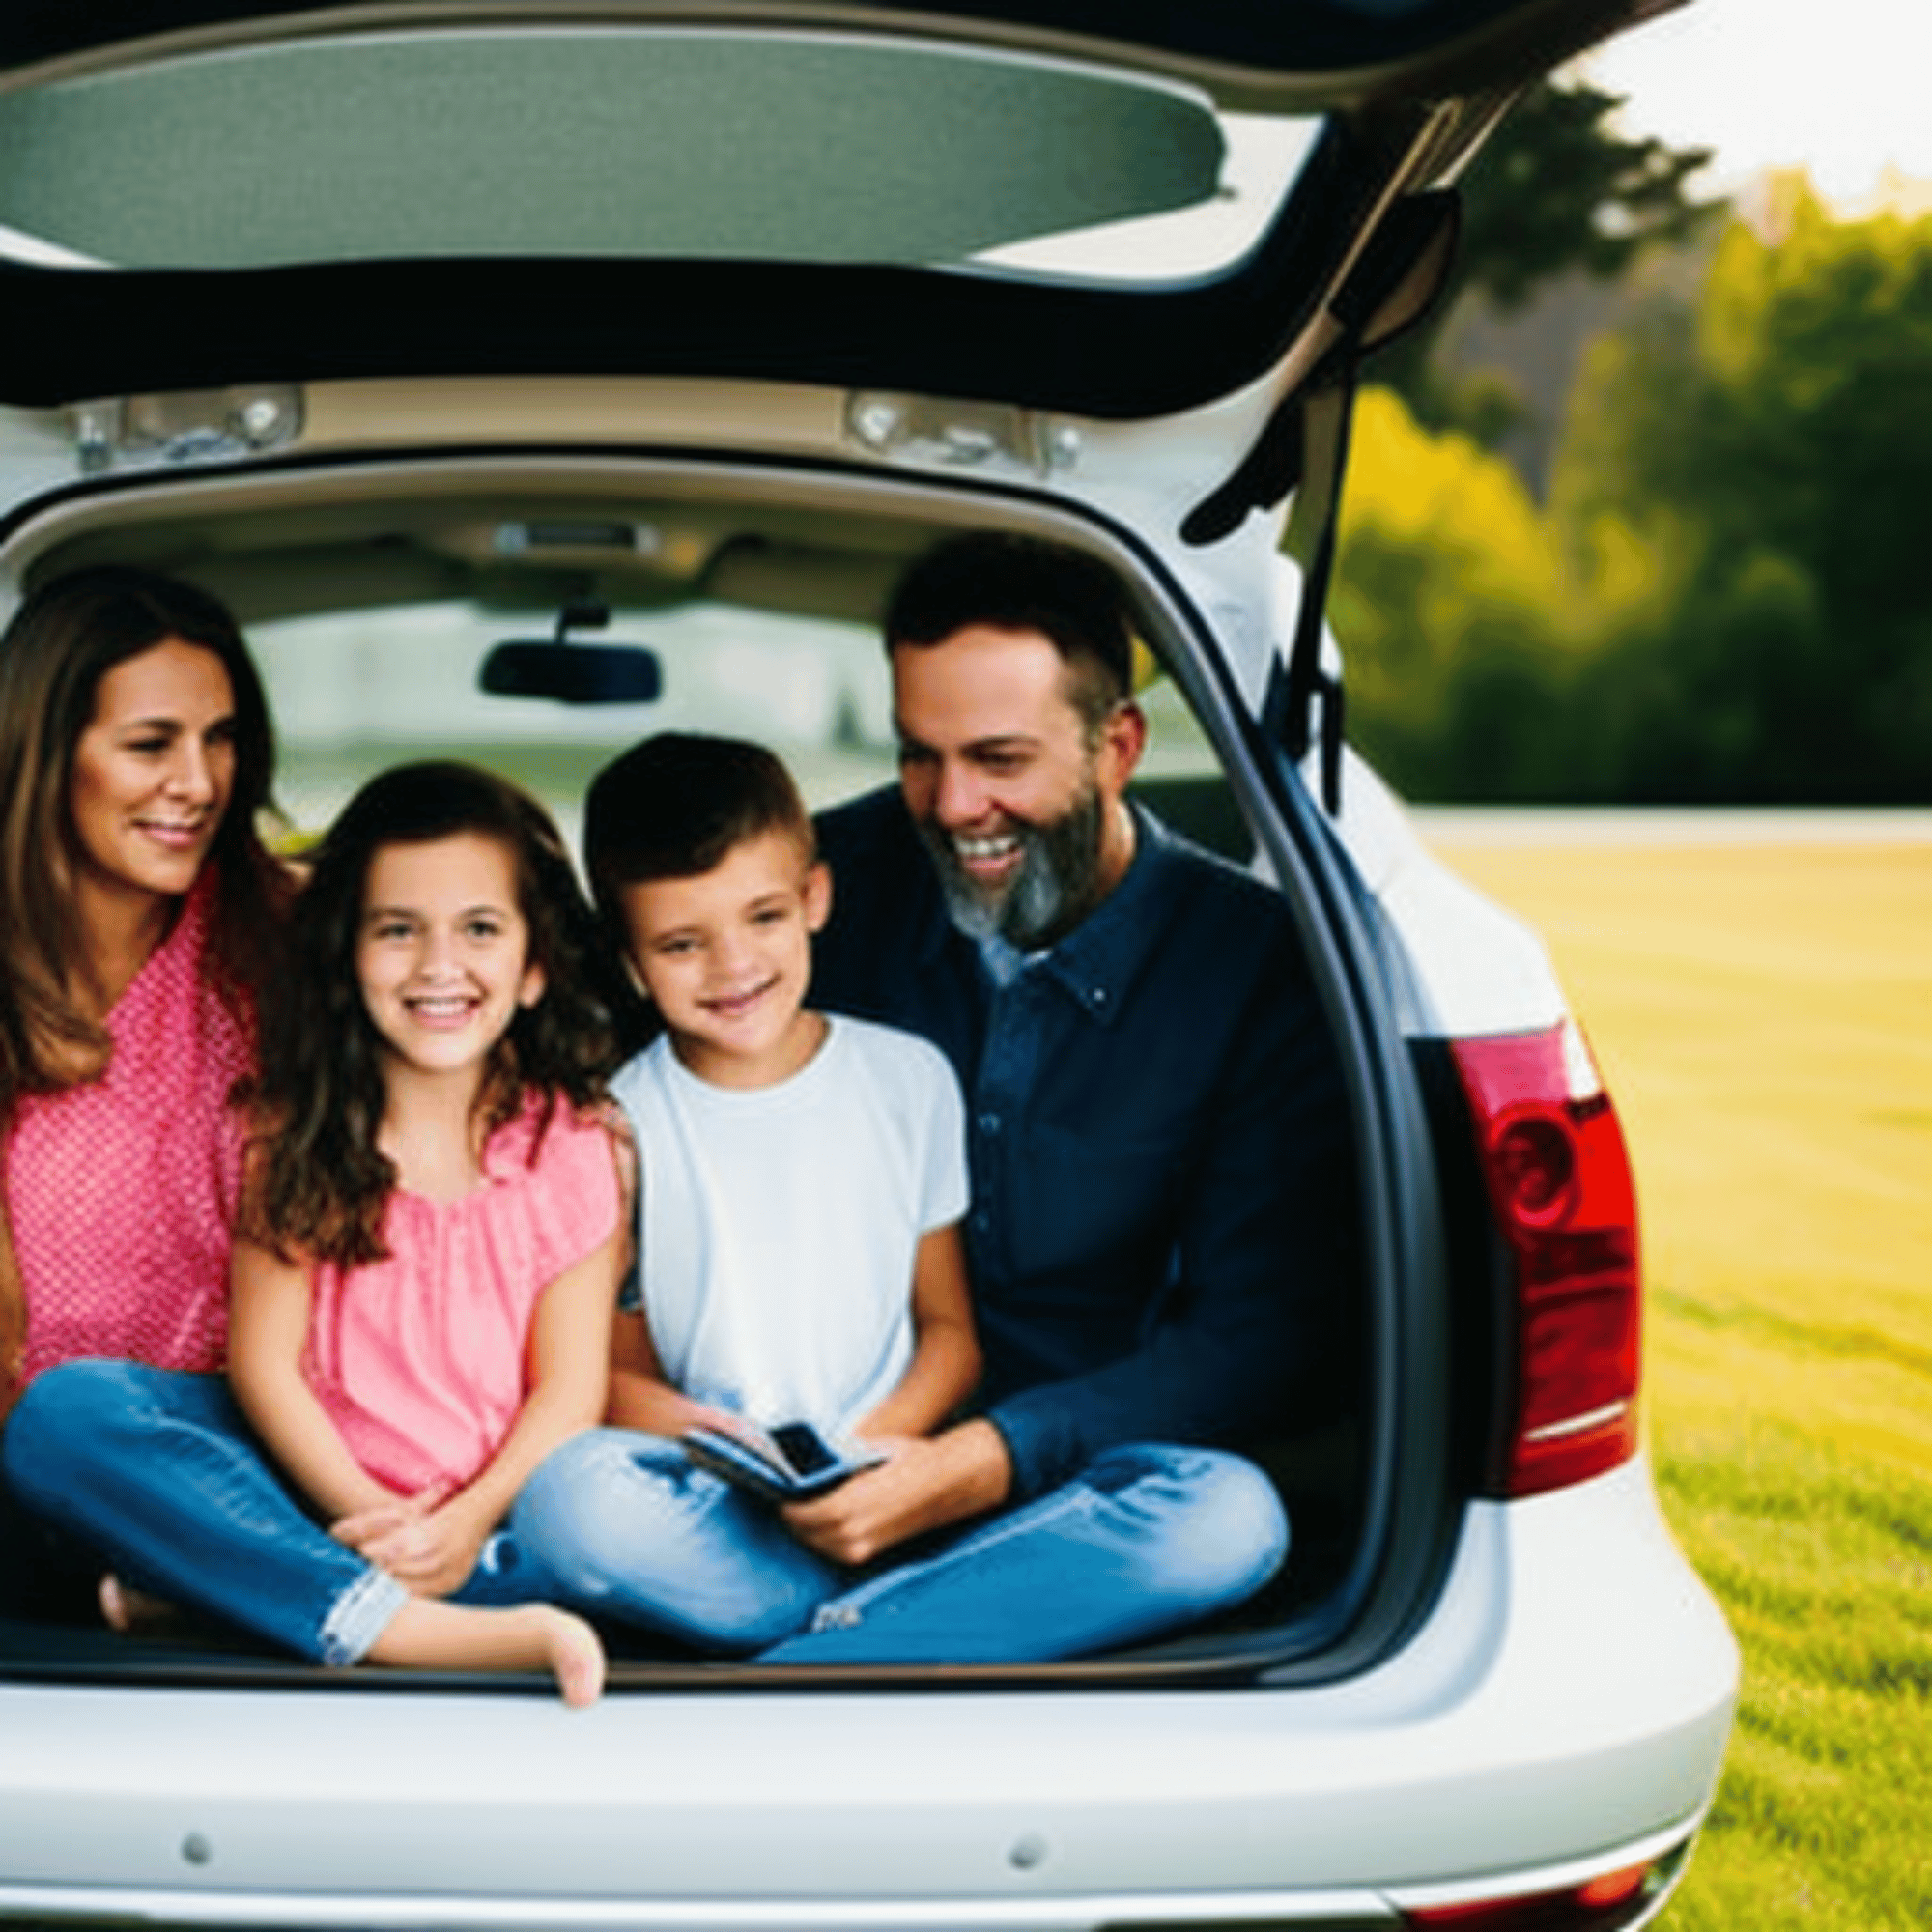 A family of four packing a car for a road trip.